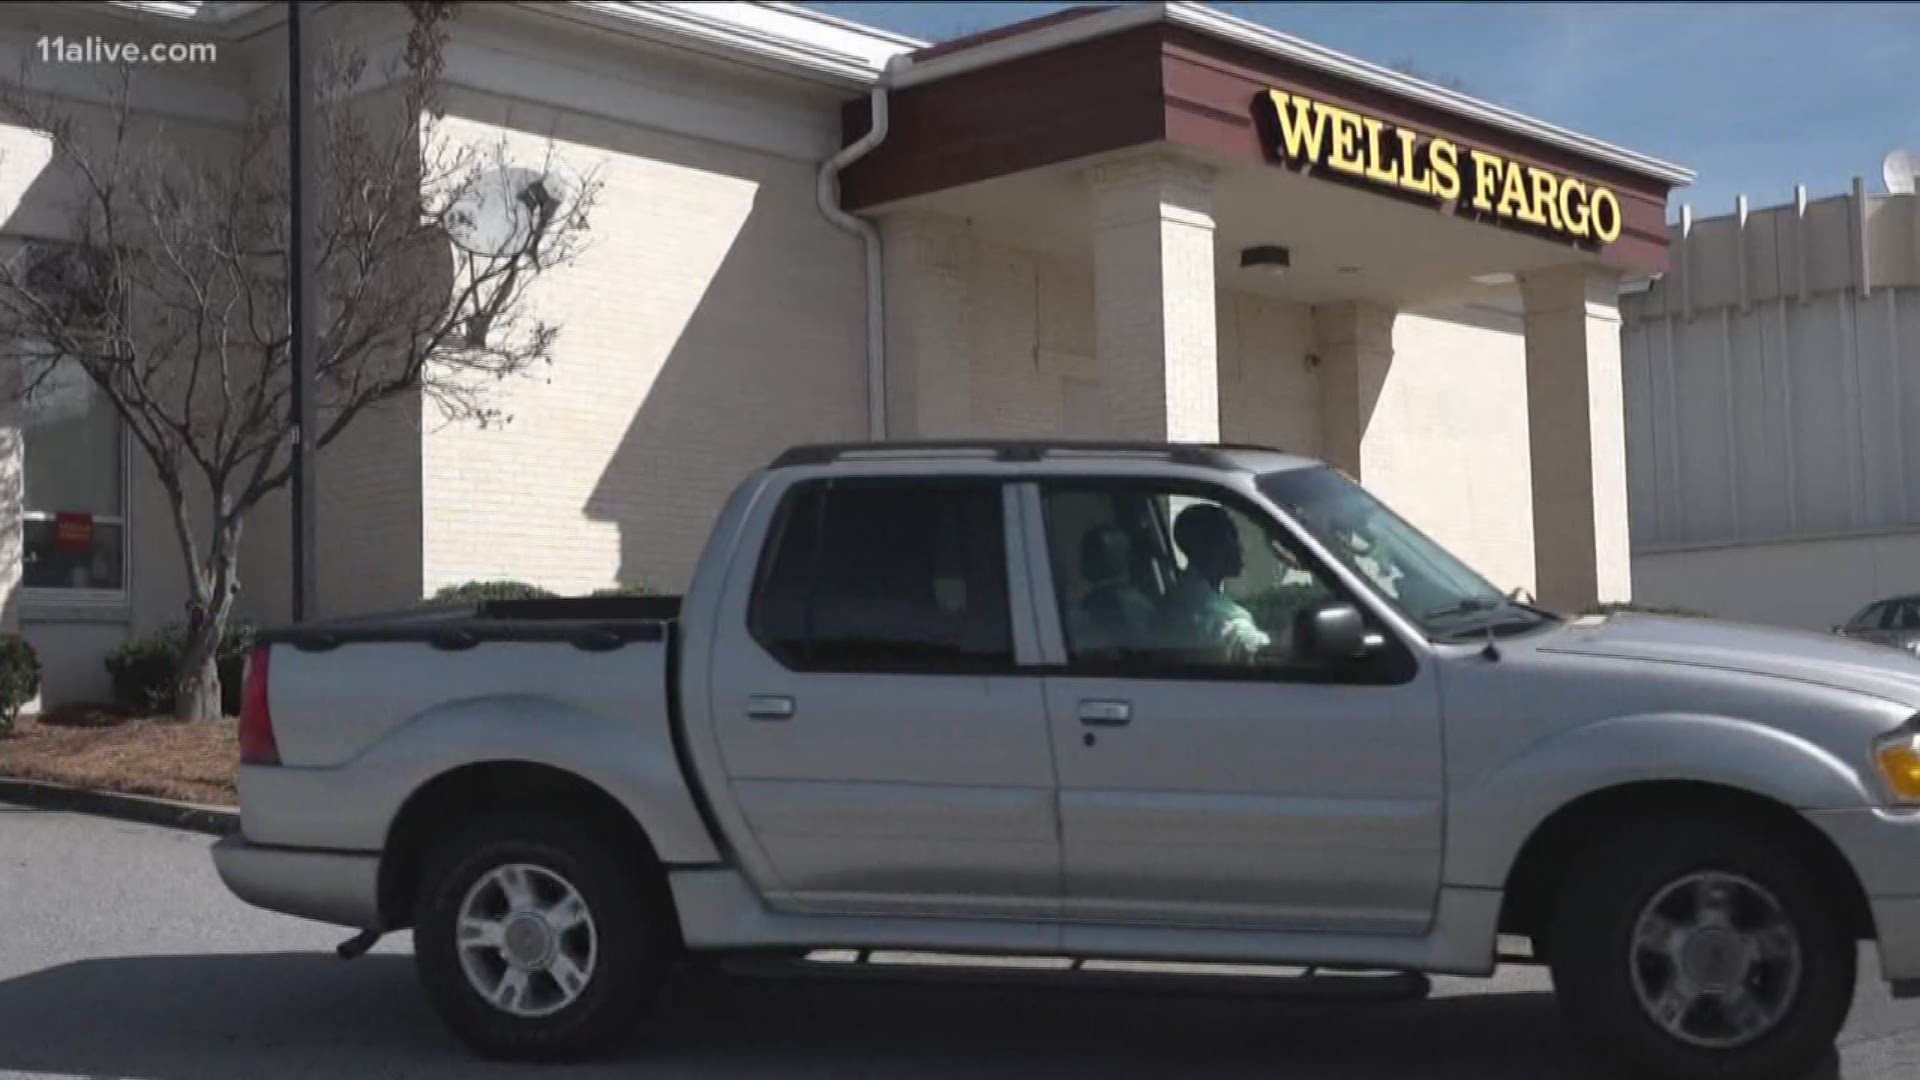 Wells Fargo said workers discovered the problem following routine maintenance.